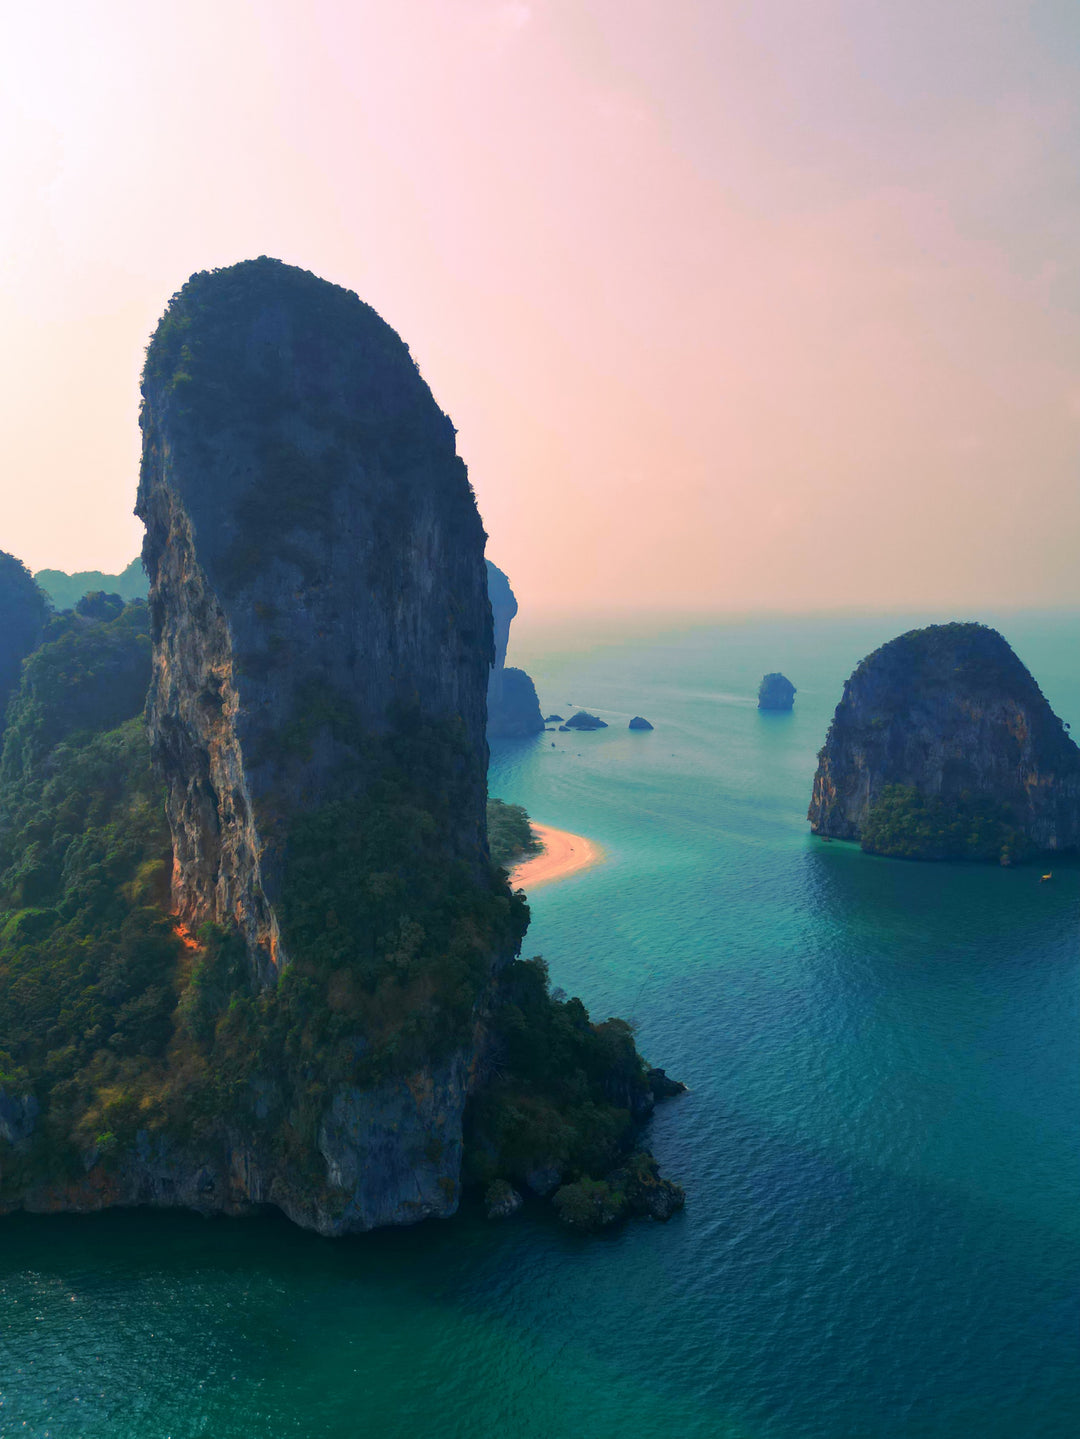 What are the best beaches in Thailand without tourists?